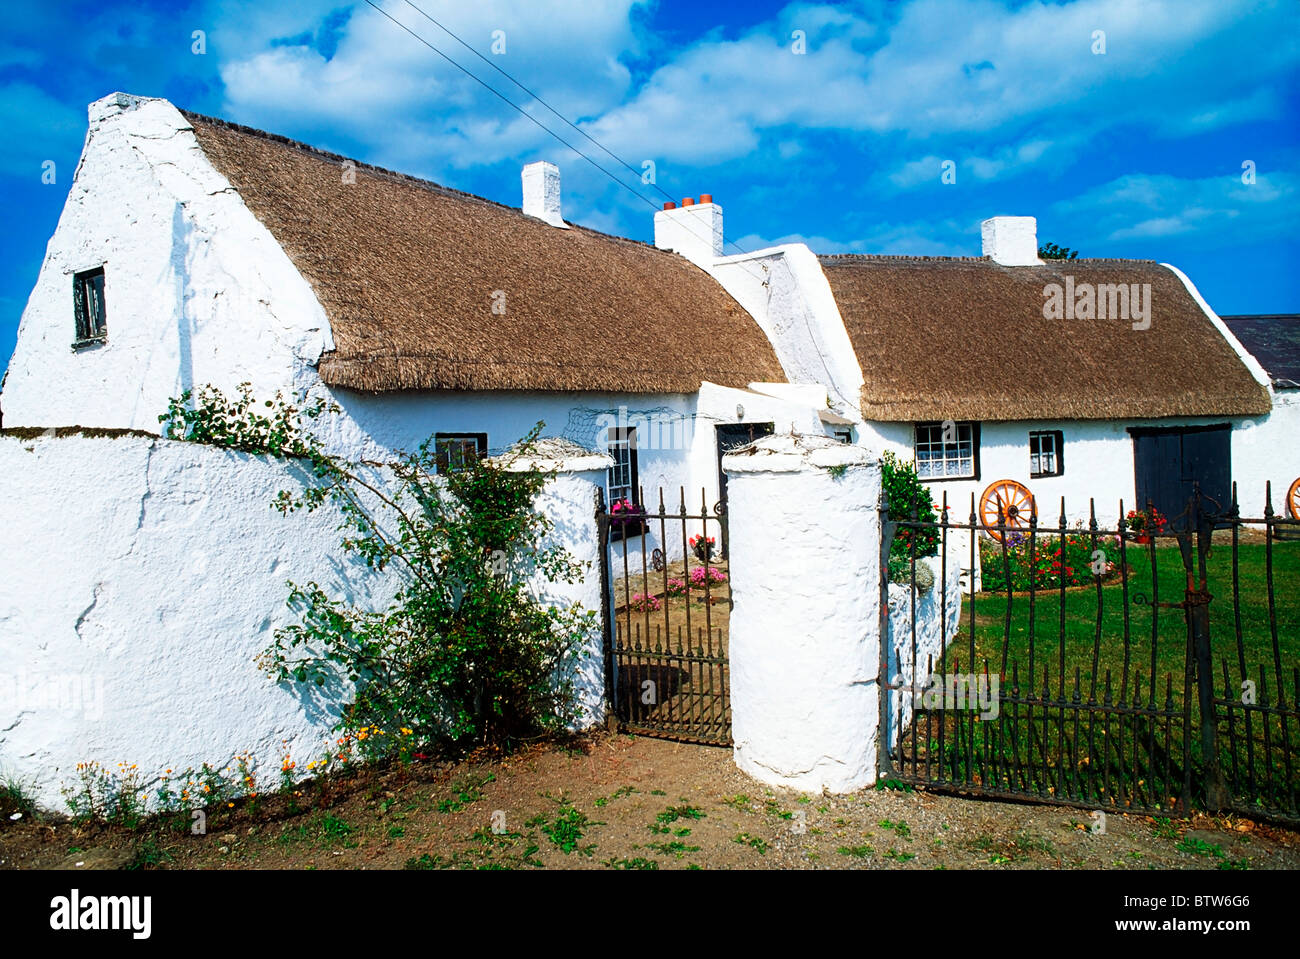 Loughshinny Co Dublin Ireland Cottages Stock Photo 32516070